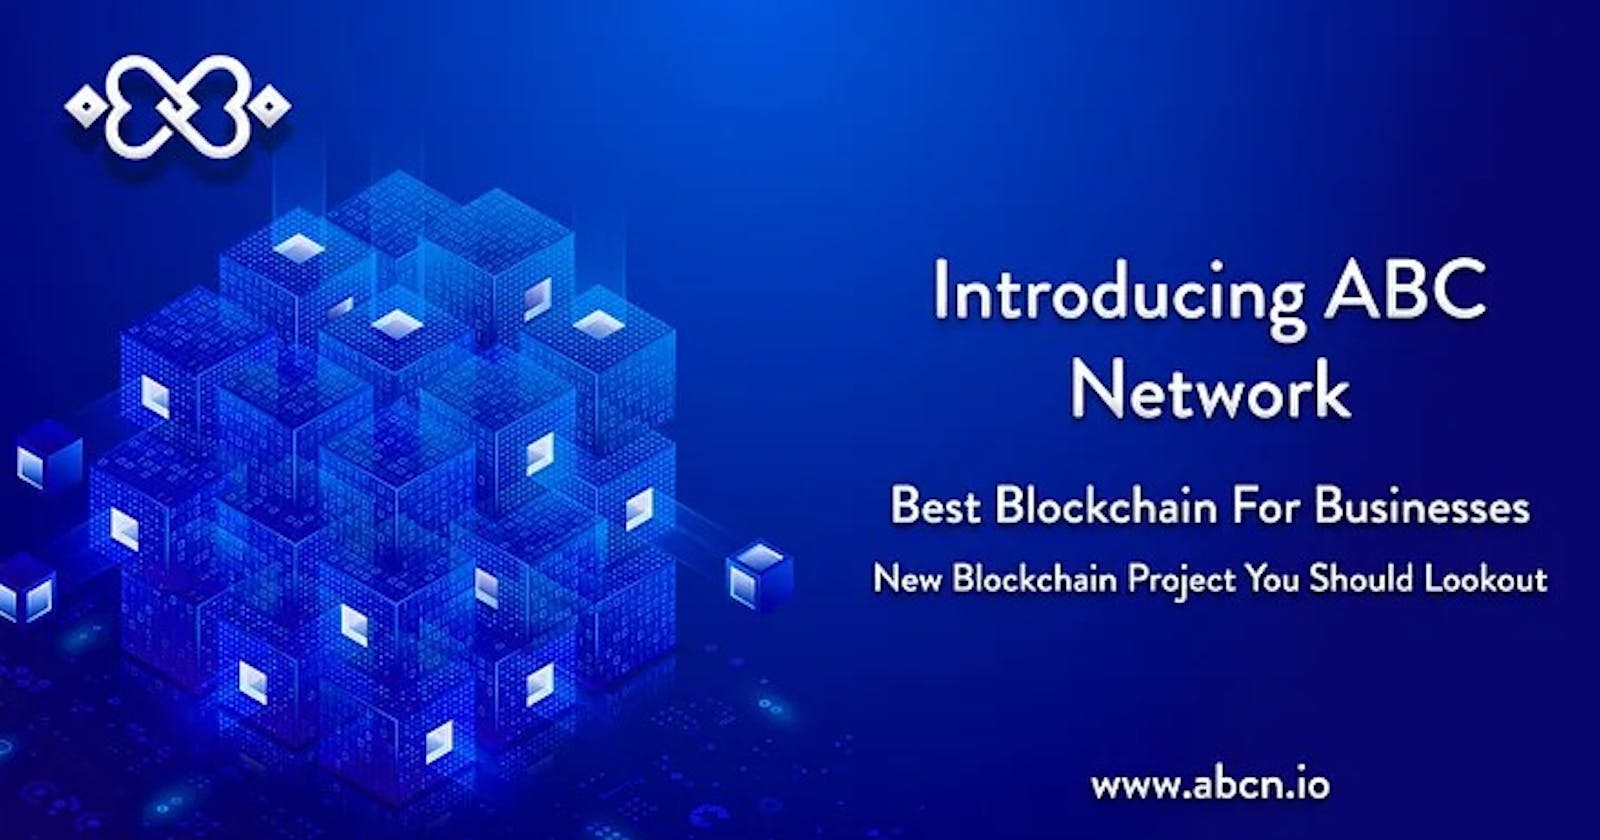 ABC Network- New Blockchain Project You Should Lookout!